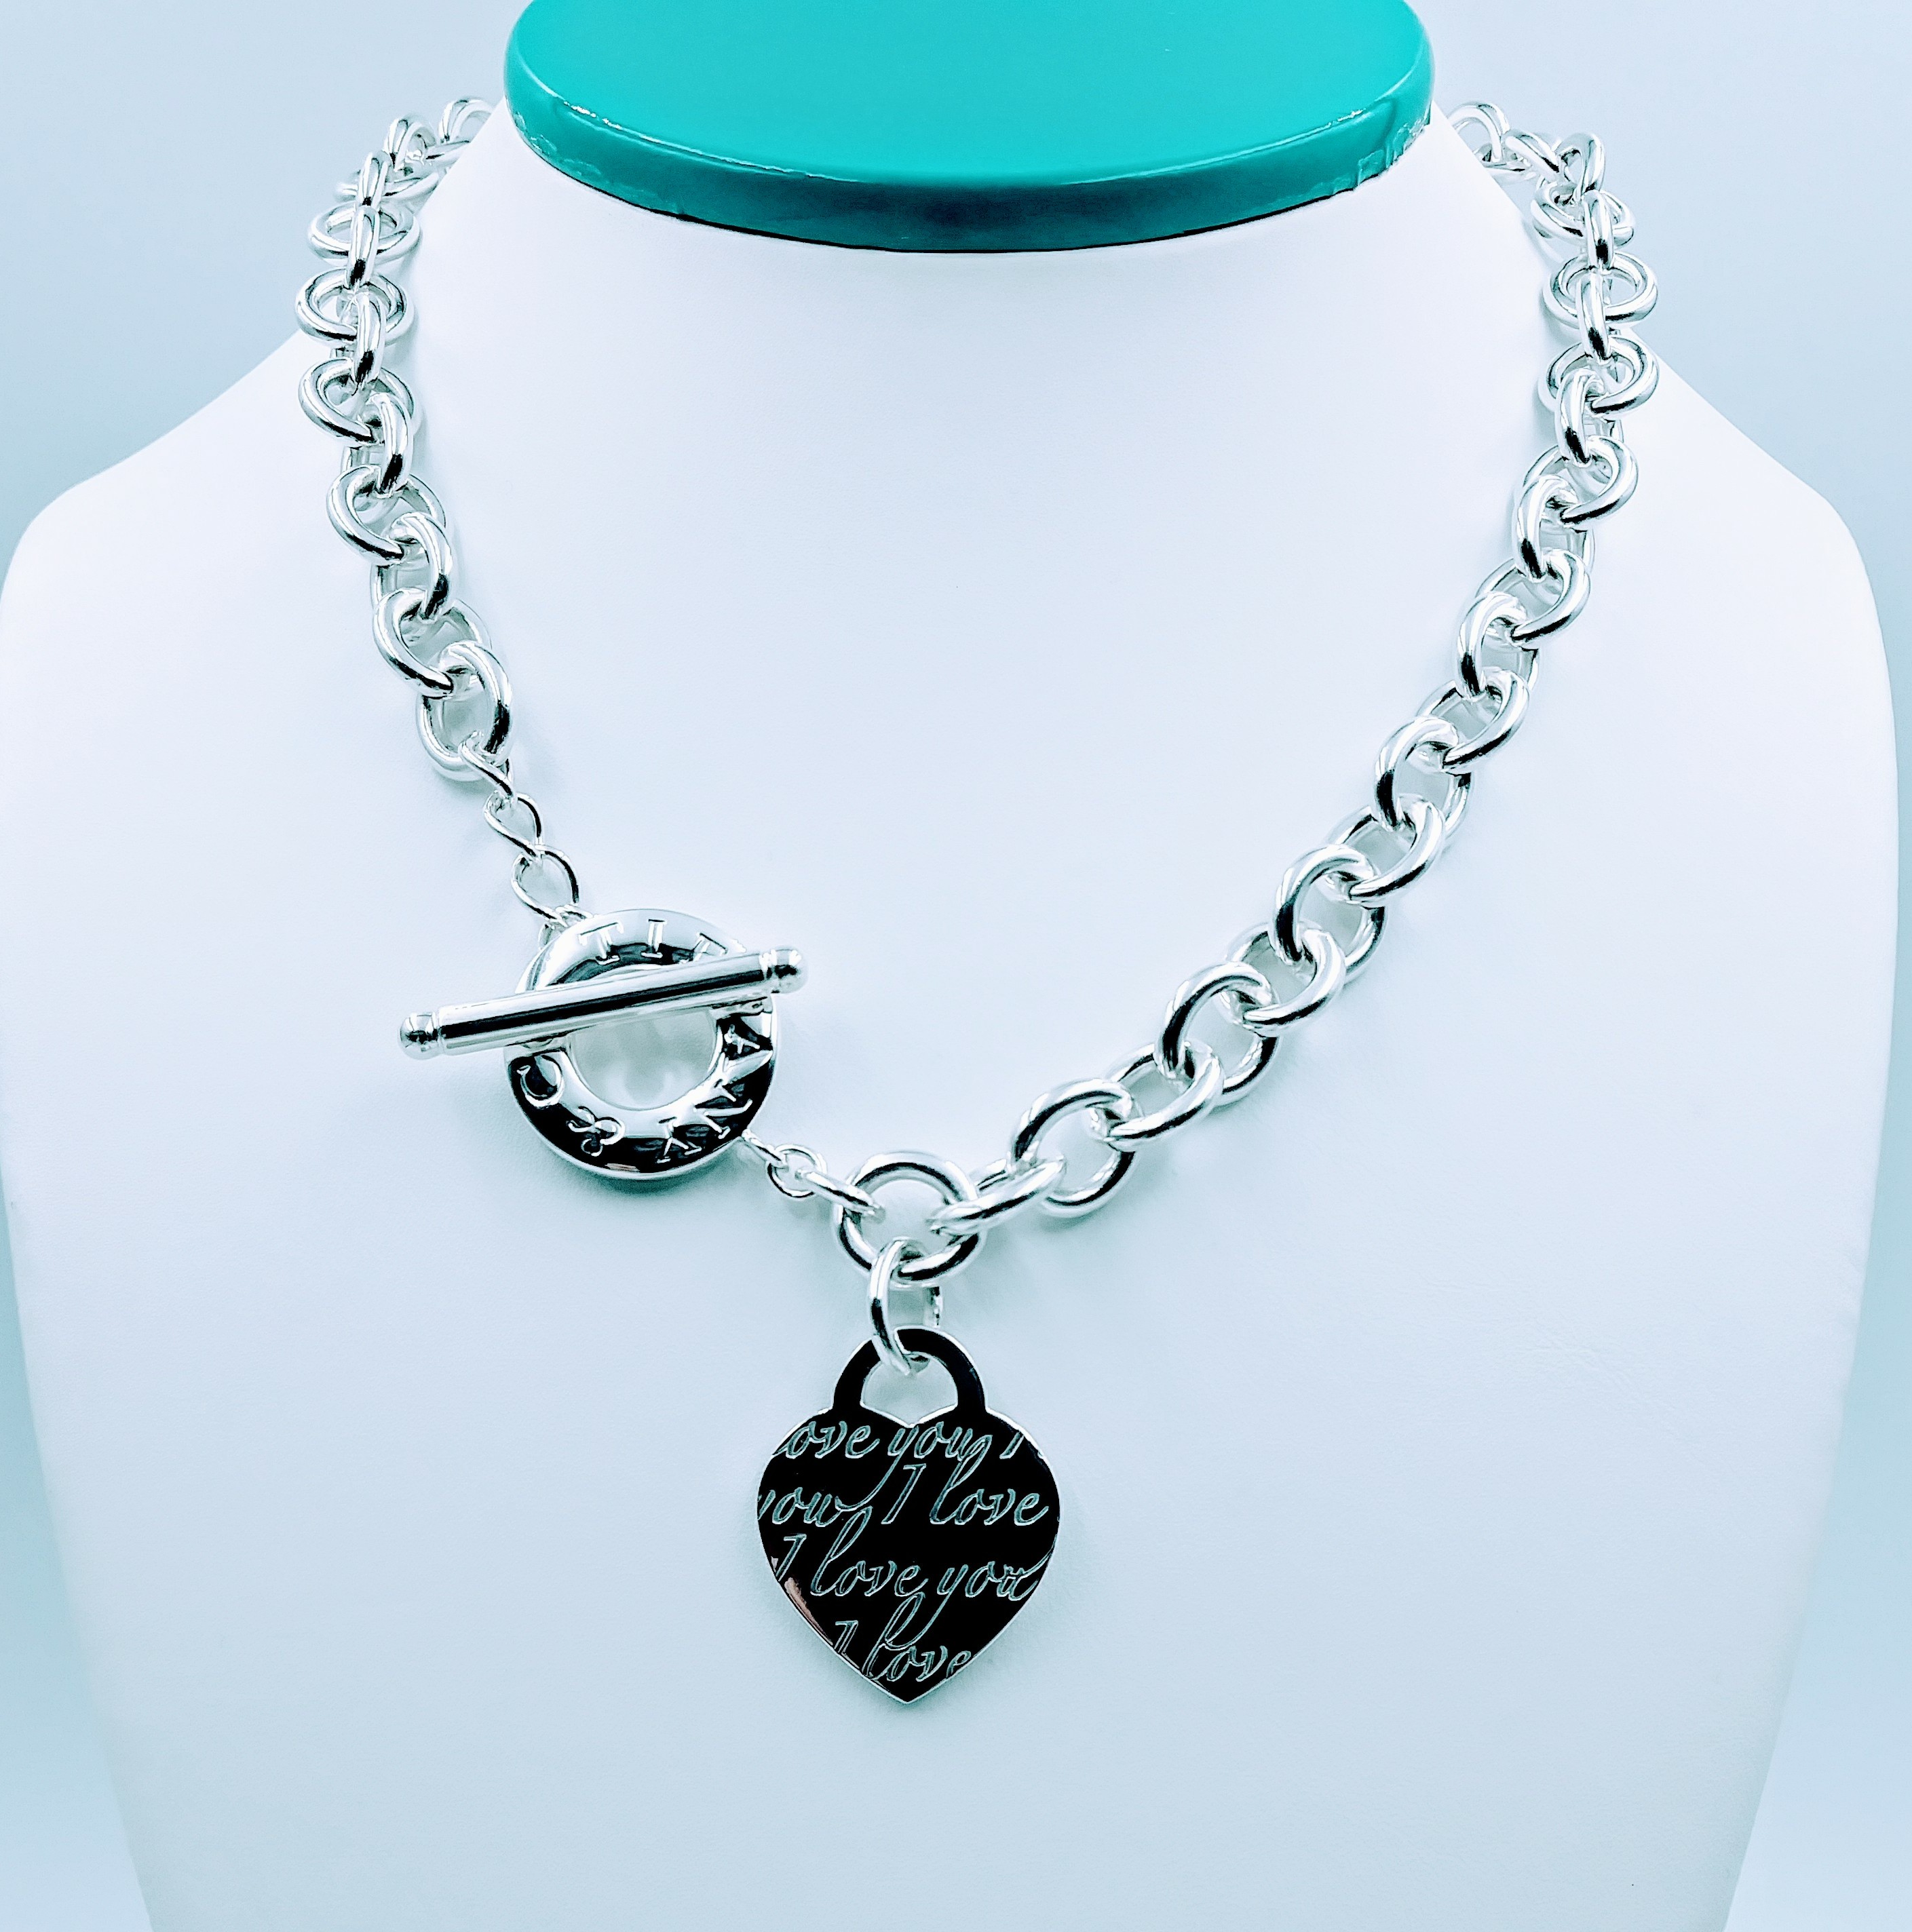 tiffany & co toggle necklace Tiffany heart toggle necklace return necklaces